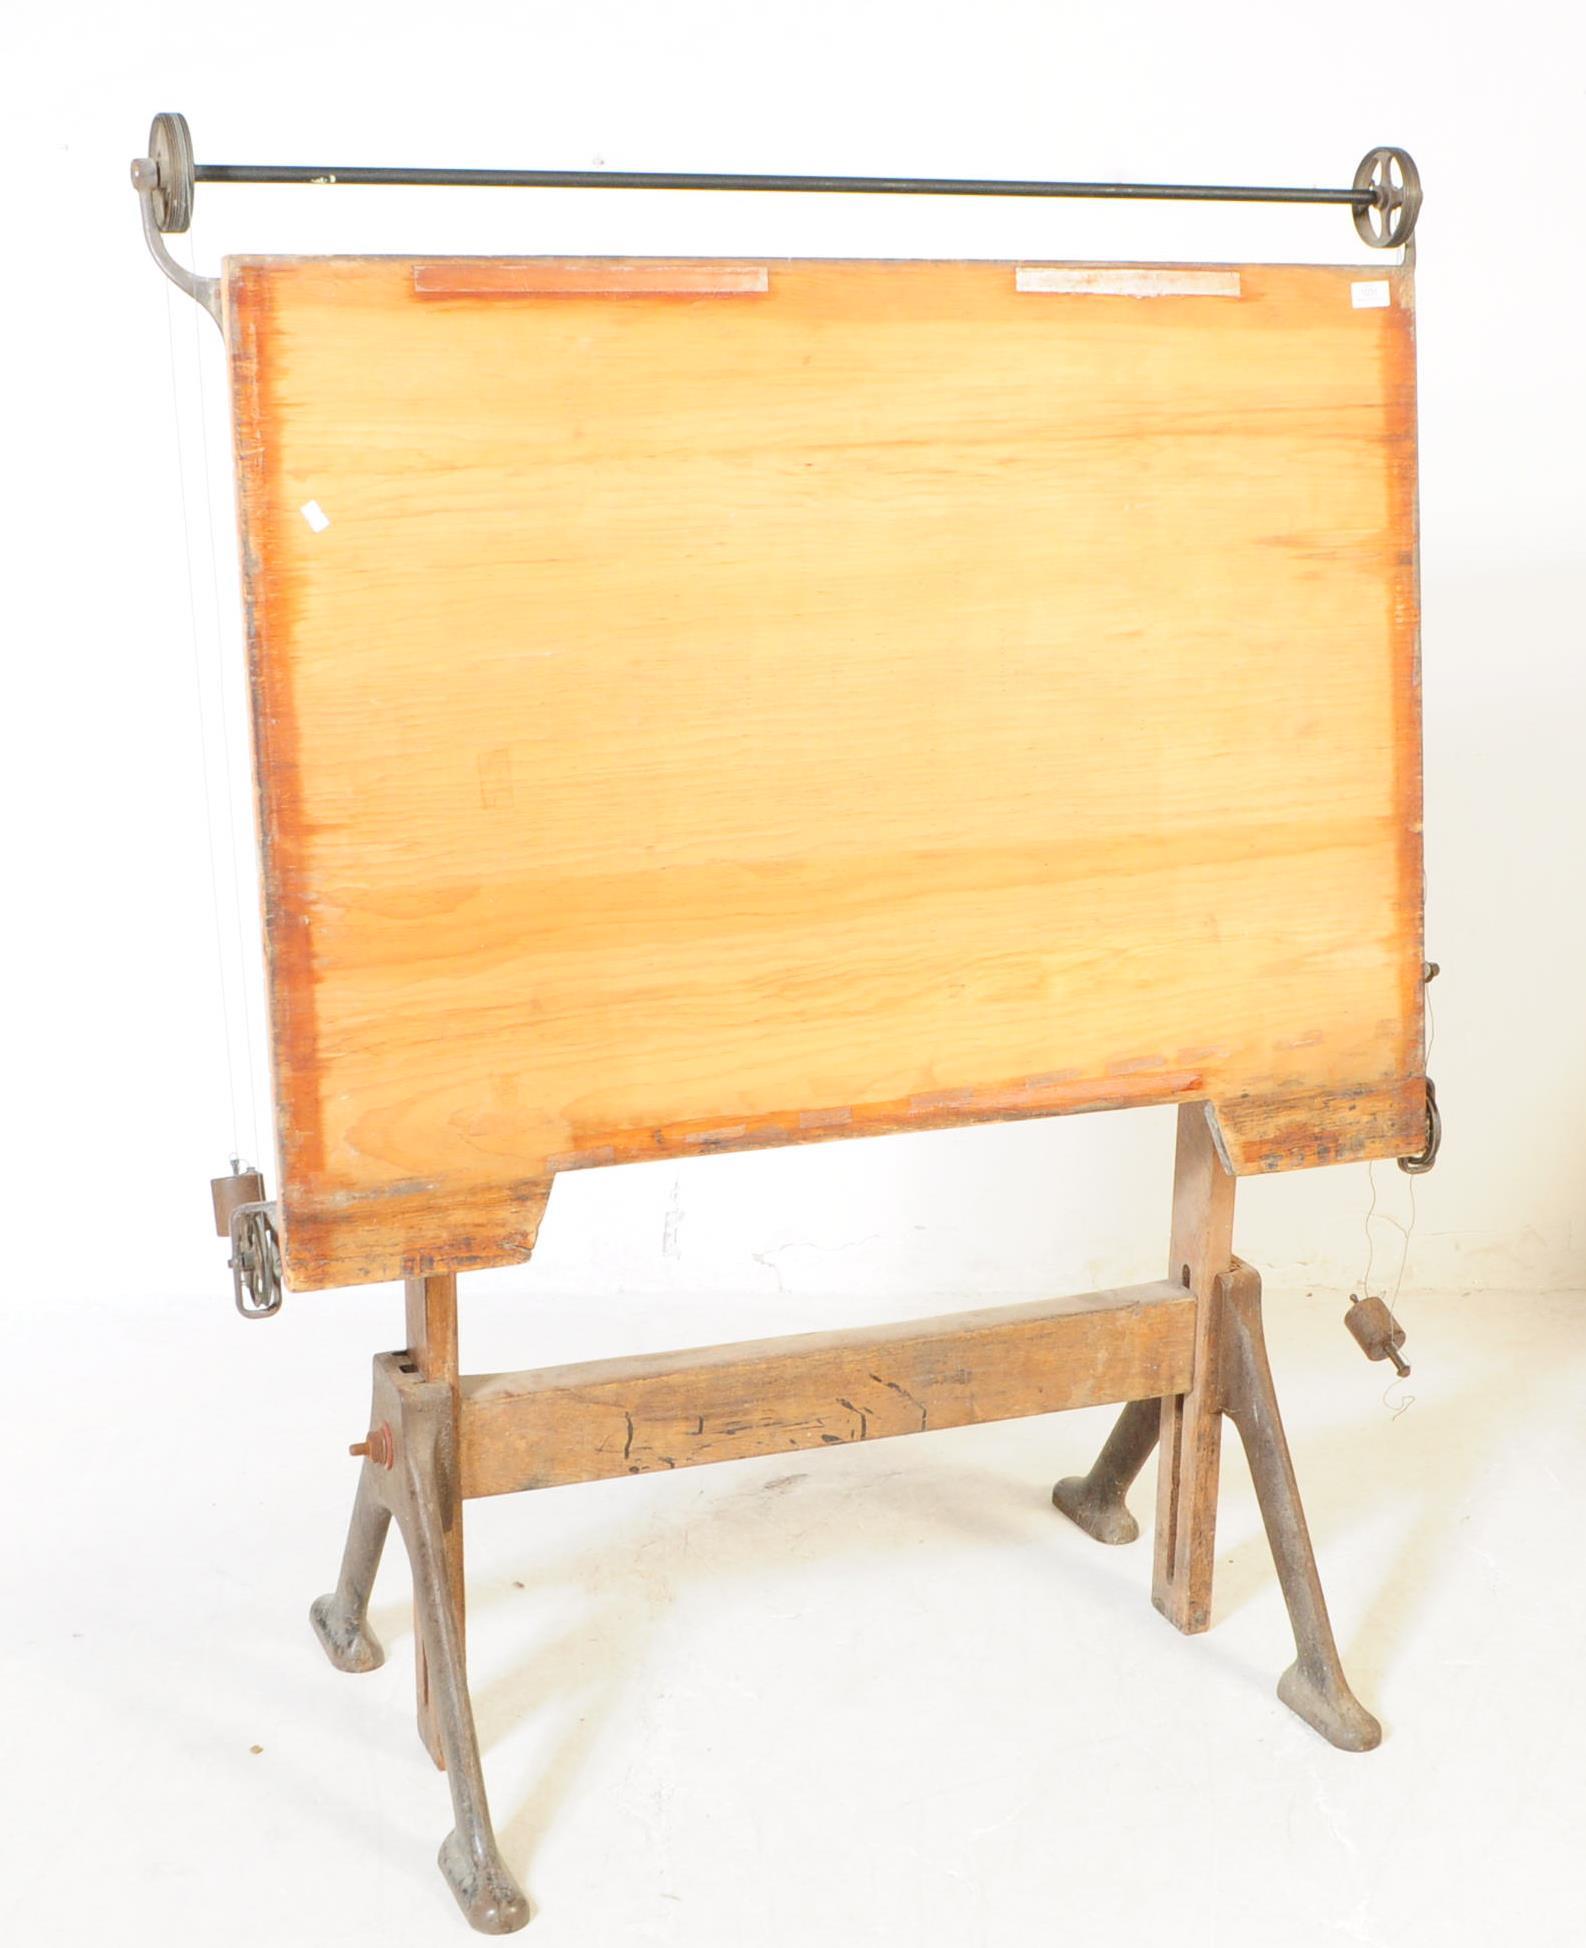 EARLY 20TH CENTURY DRAUGHTSMAN'S ARTIST DRAWING TABLE